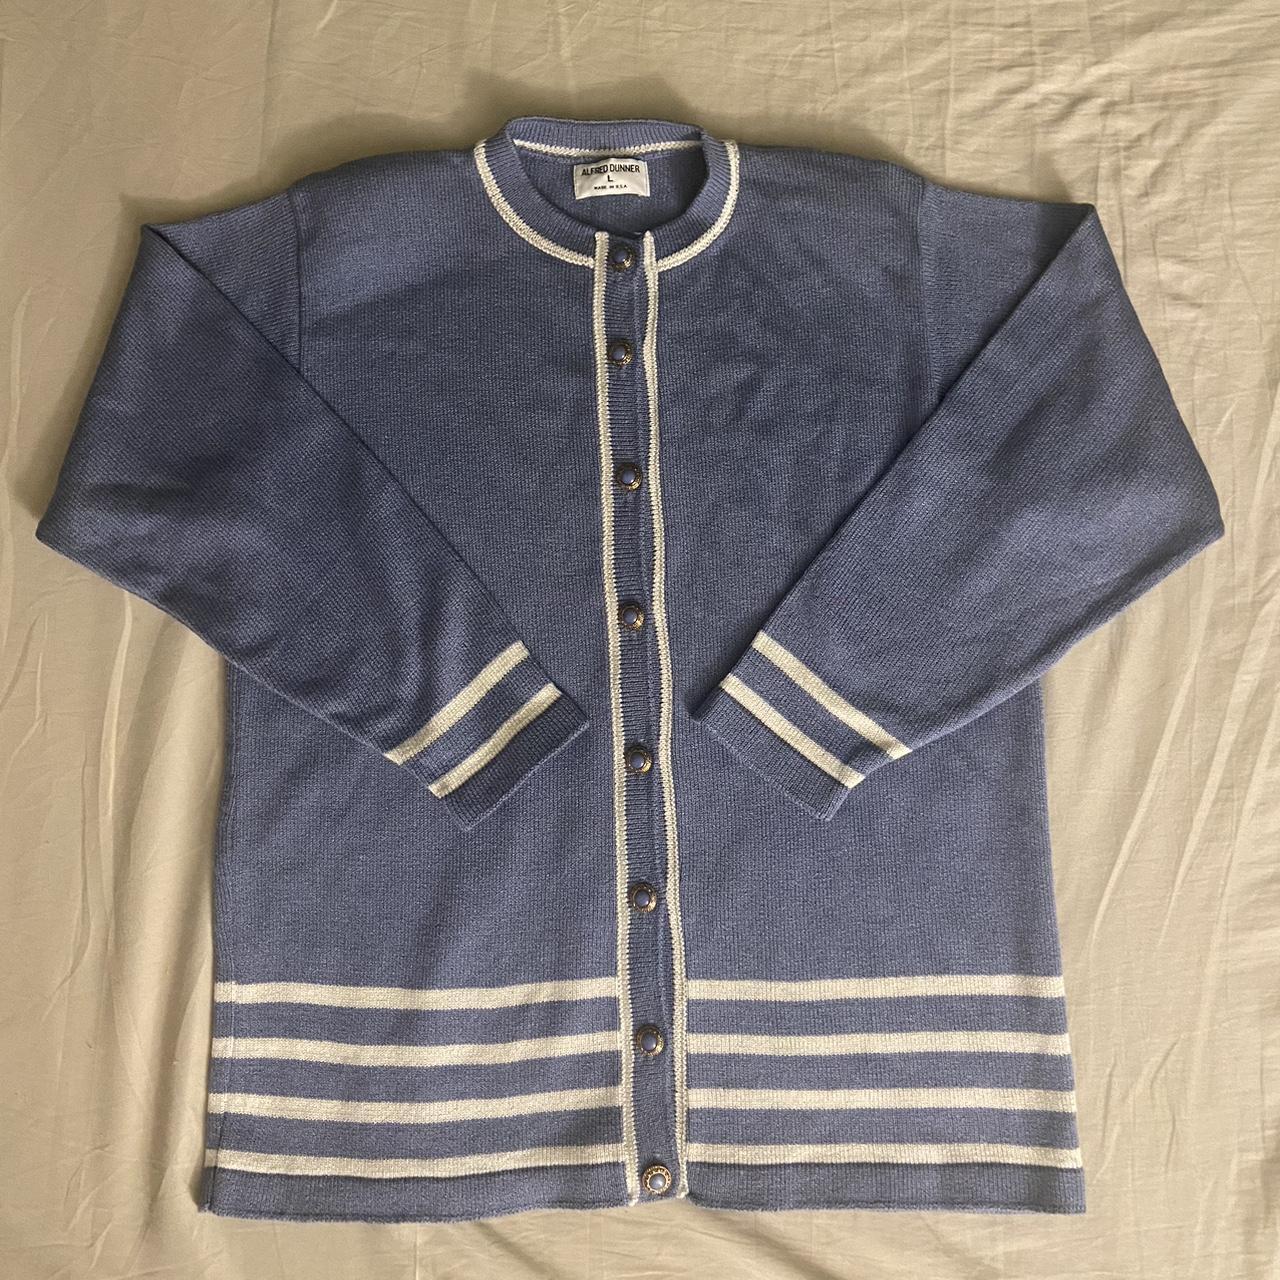 Alfred Dunner Women's Blue and White Cardigan | Depop